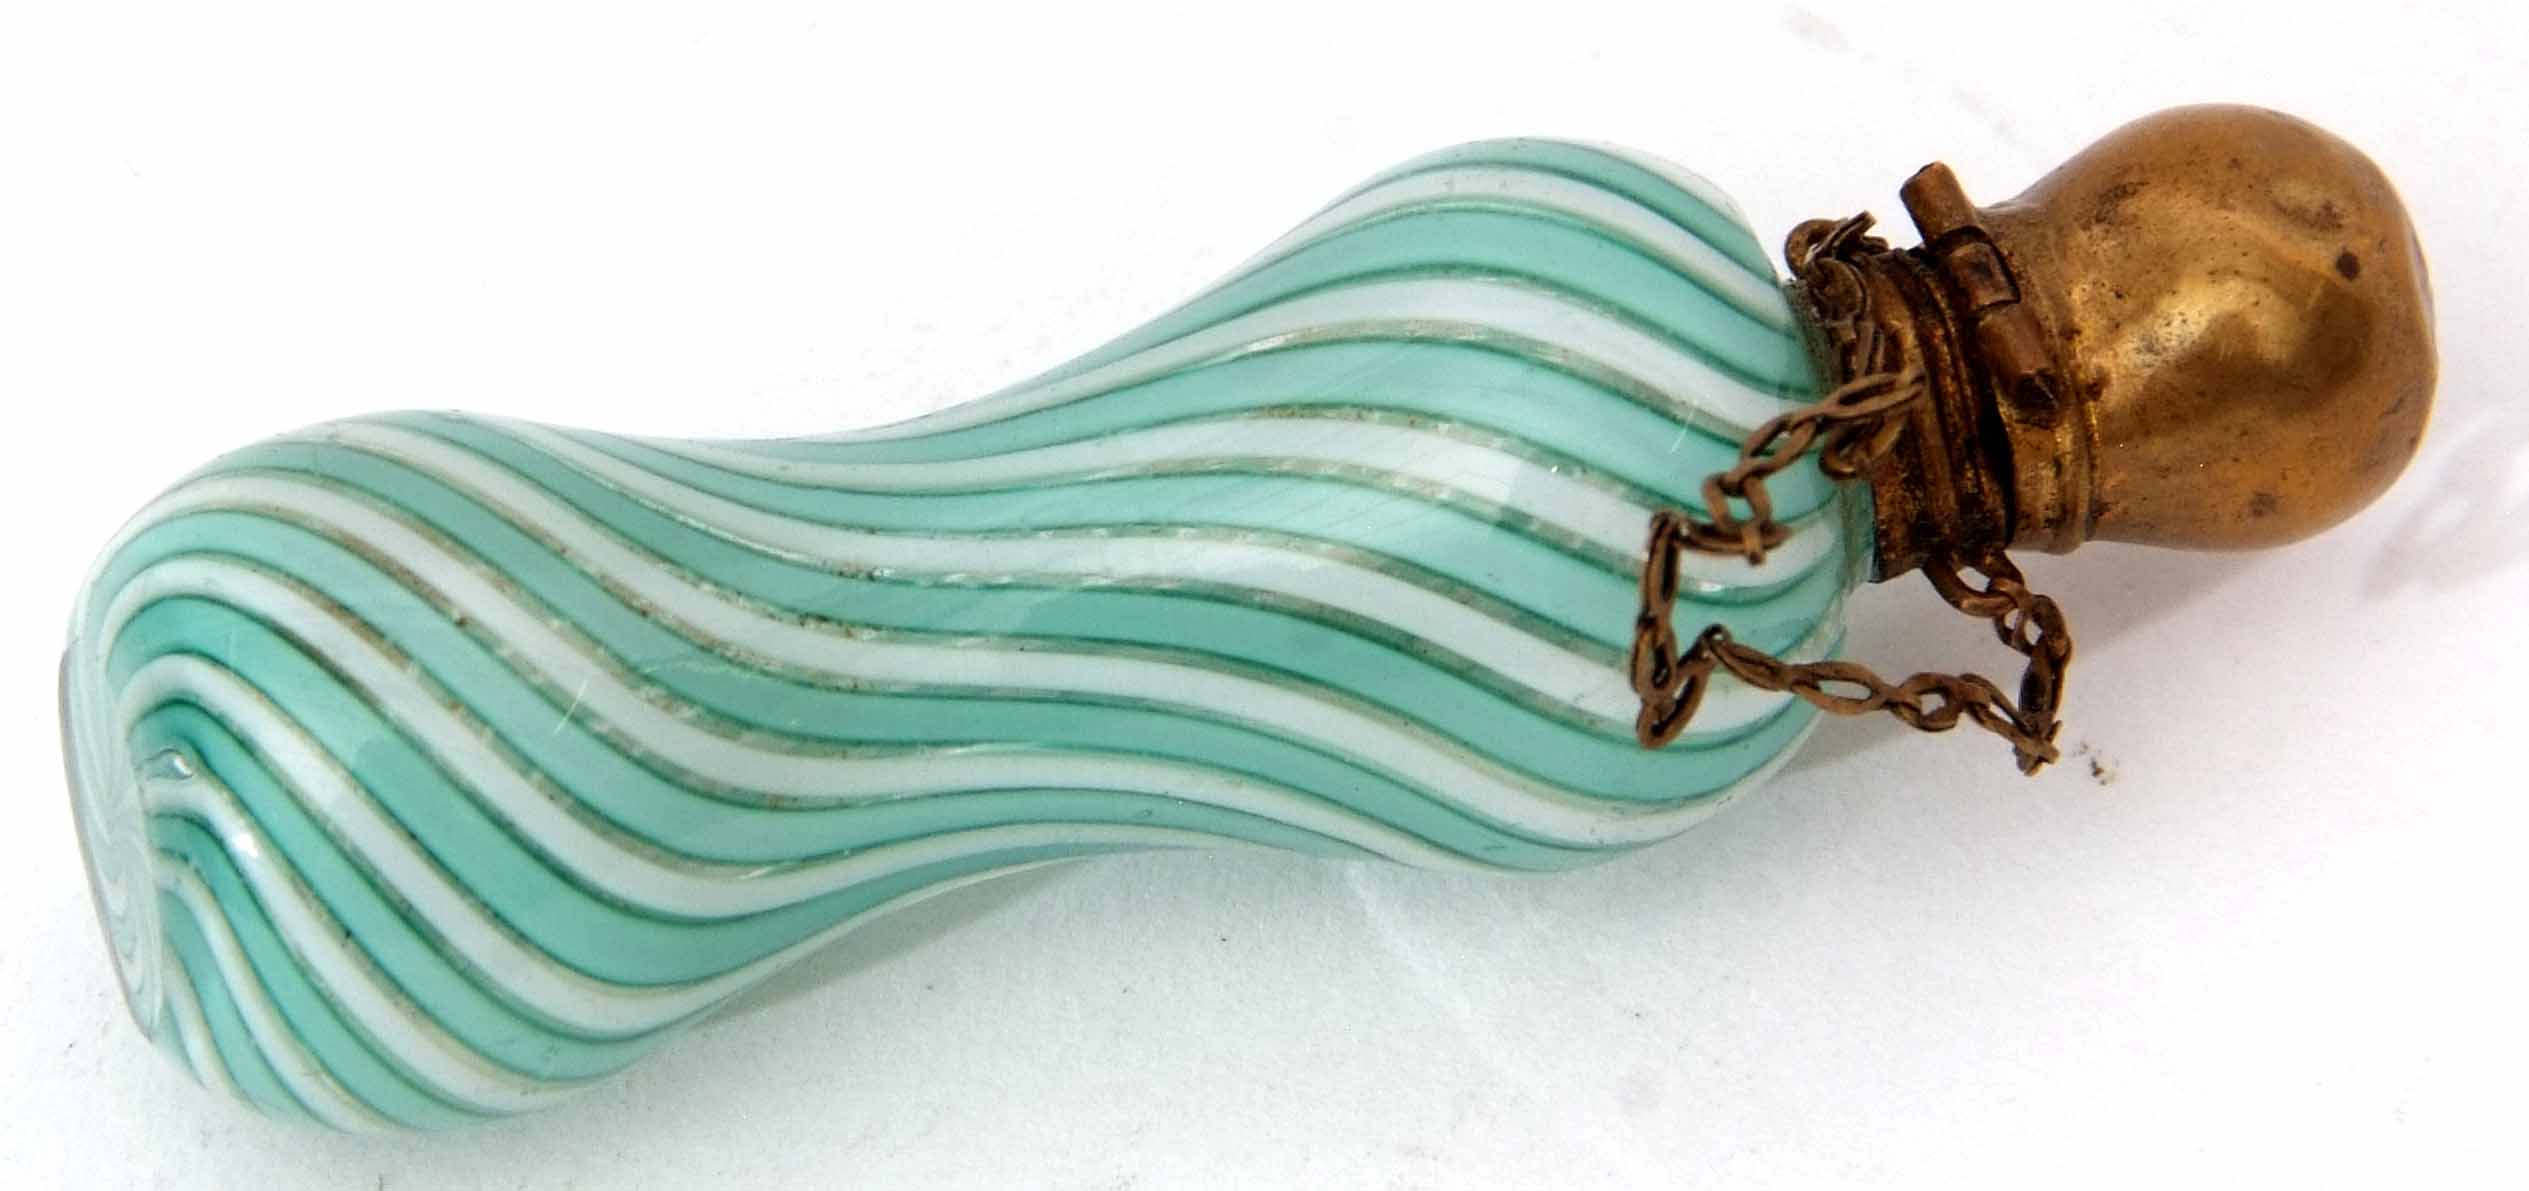 Late 19th century Continental scent bottle of waisted clear glass form with white and aqua blue